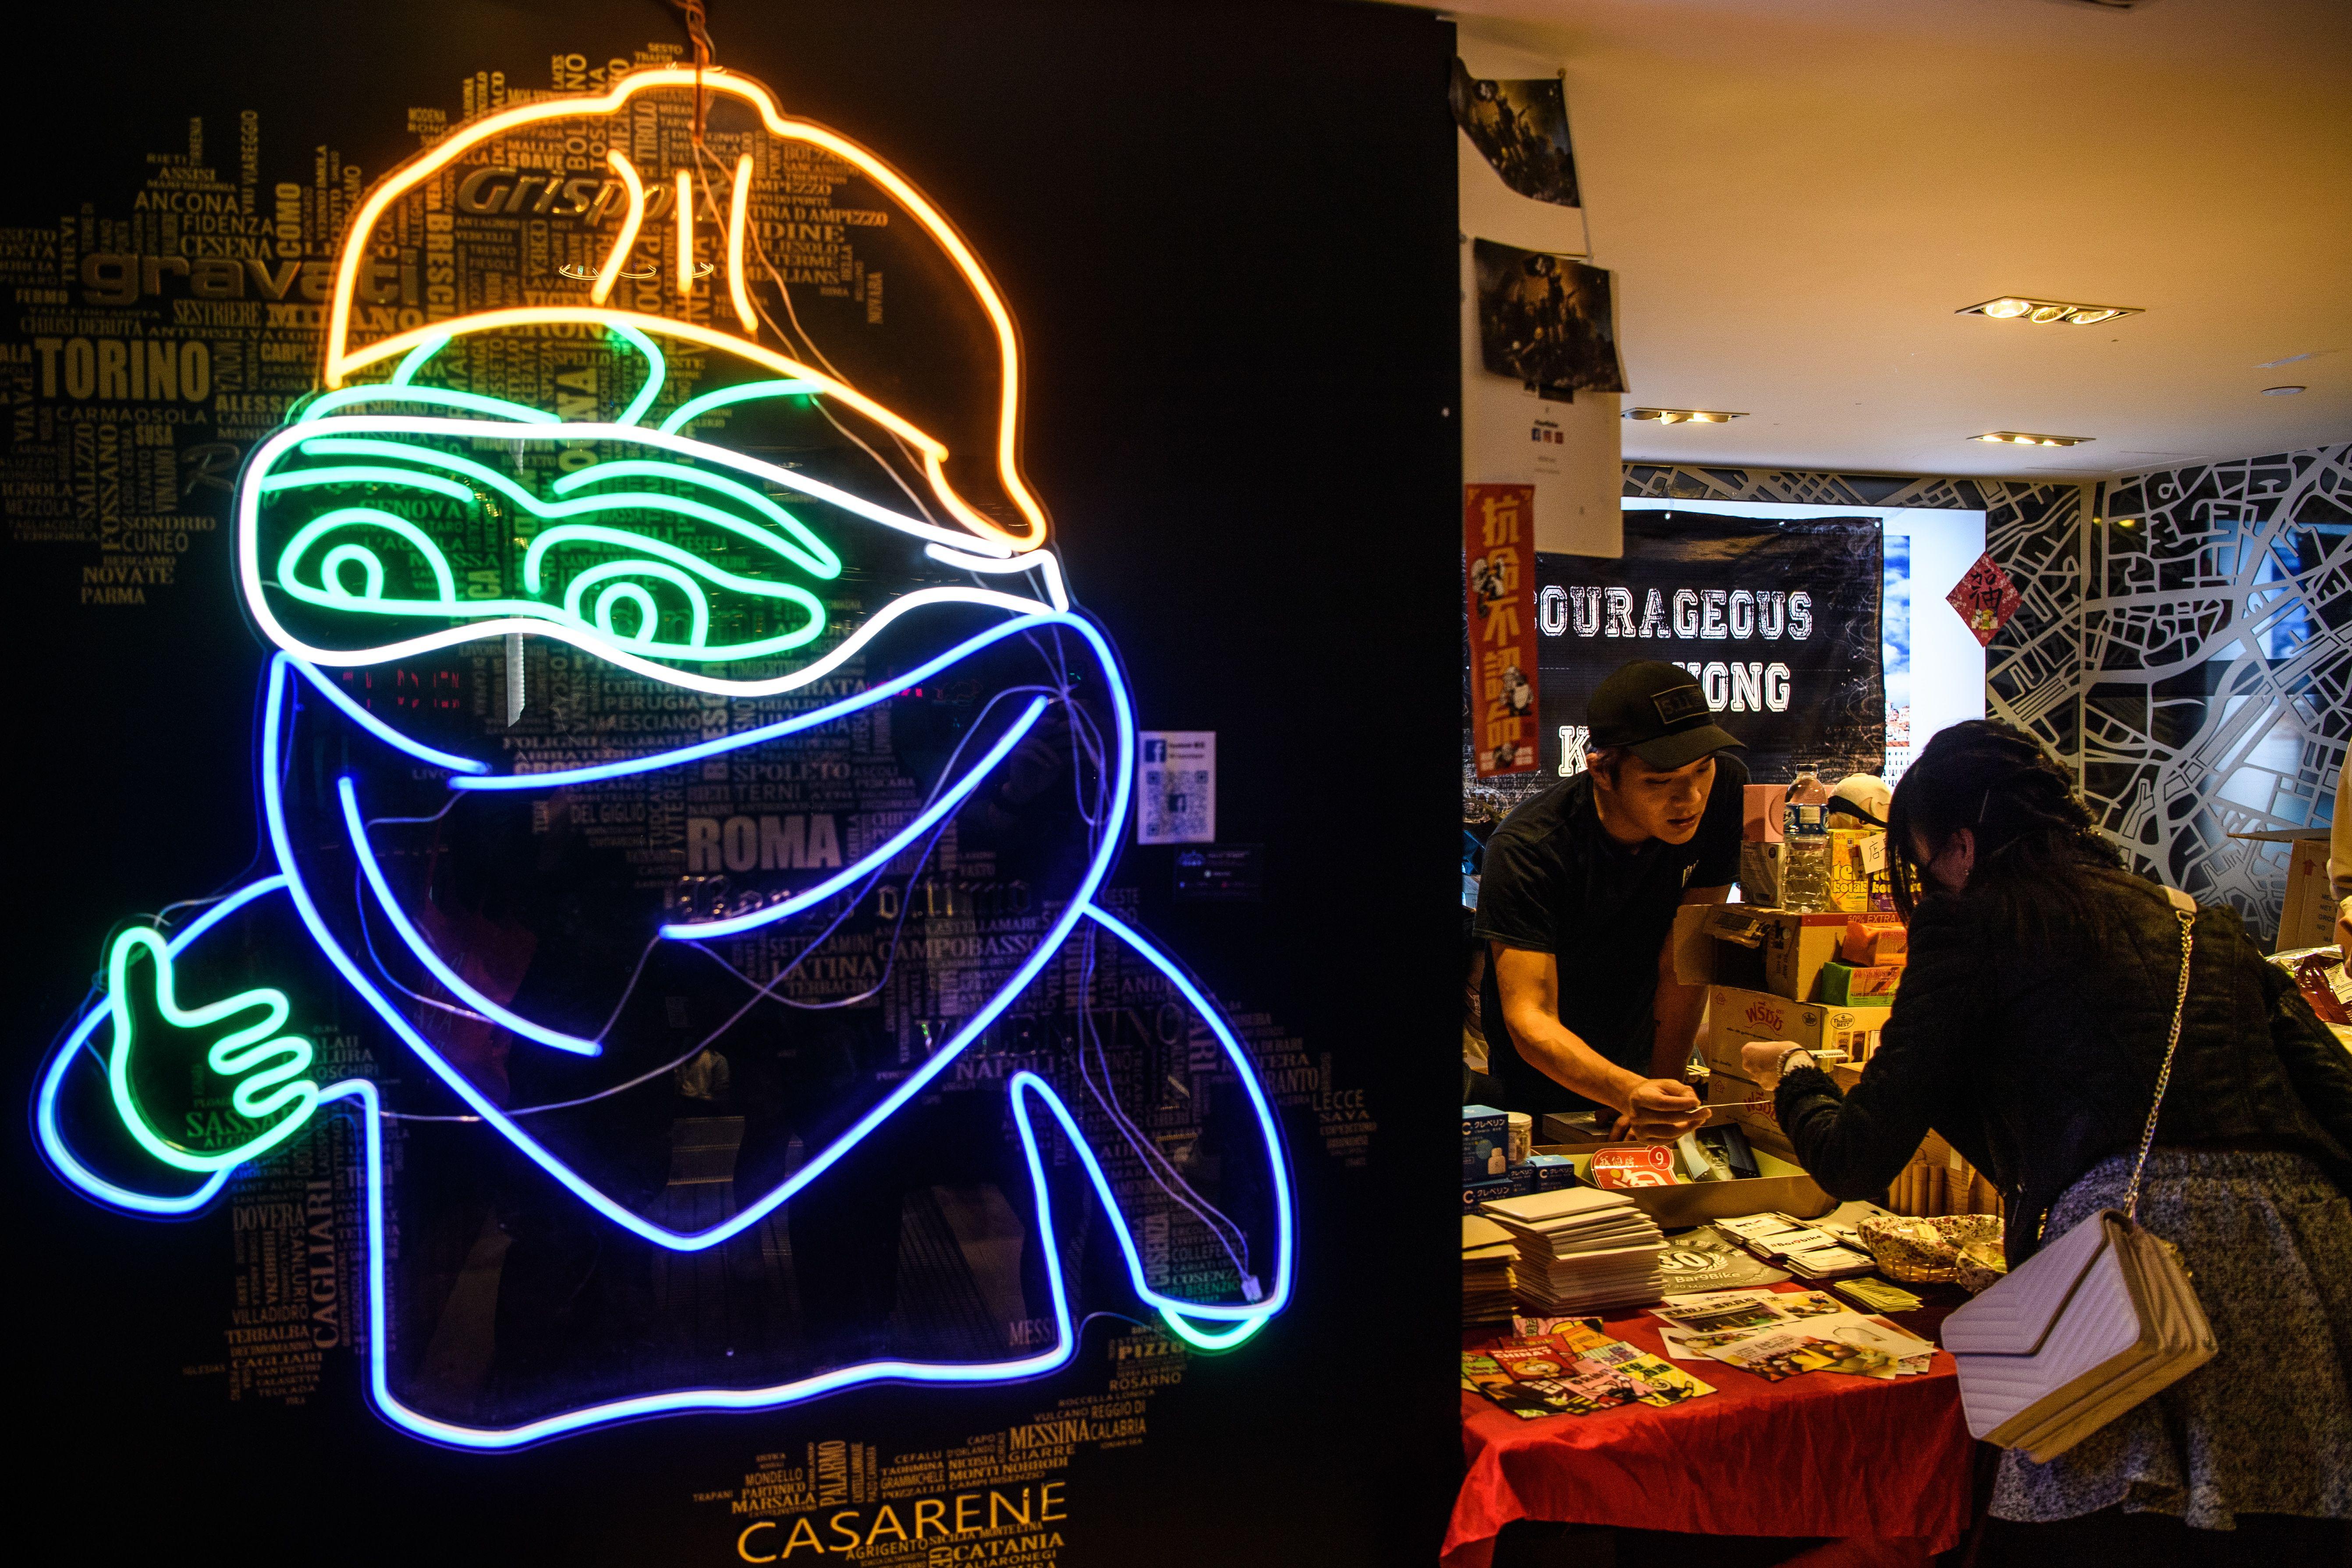 In this picture taken on January 23, 2020, a neon sign depicting Pepe the Frog, a character used by pro-democracy activists as a symbol of their struggle in the Hong Kong protests, is displayed next to a stall set up as part of a pro-democracy themed Lunar New year market in a shopping mall in Hong Kong. (Photo by Anthony WALLACE / AFP) (Photo by ANTHONY WALLACE/AFP via Getty Images)